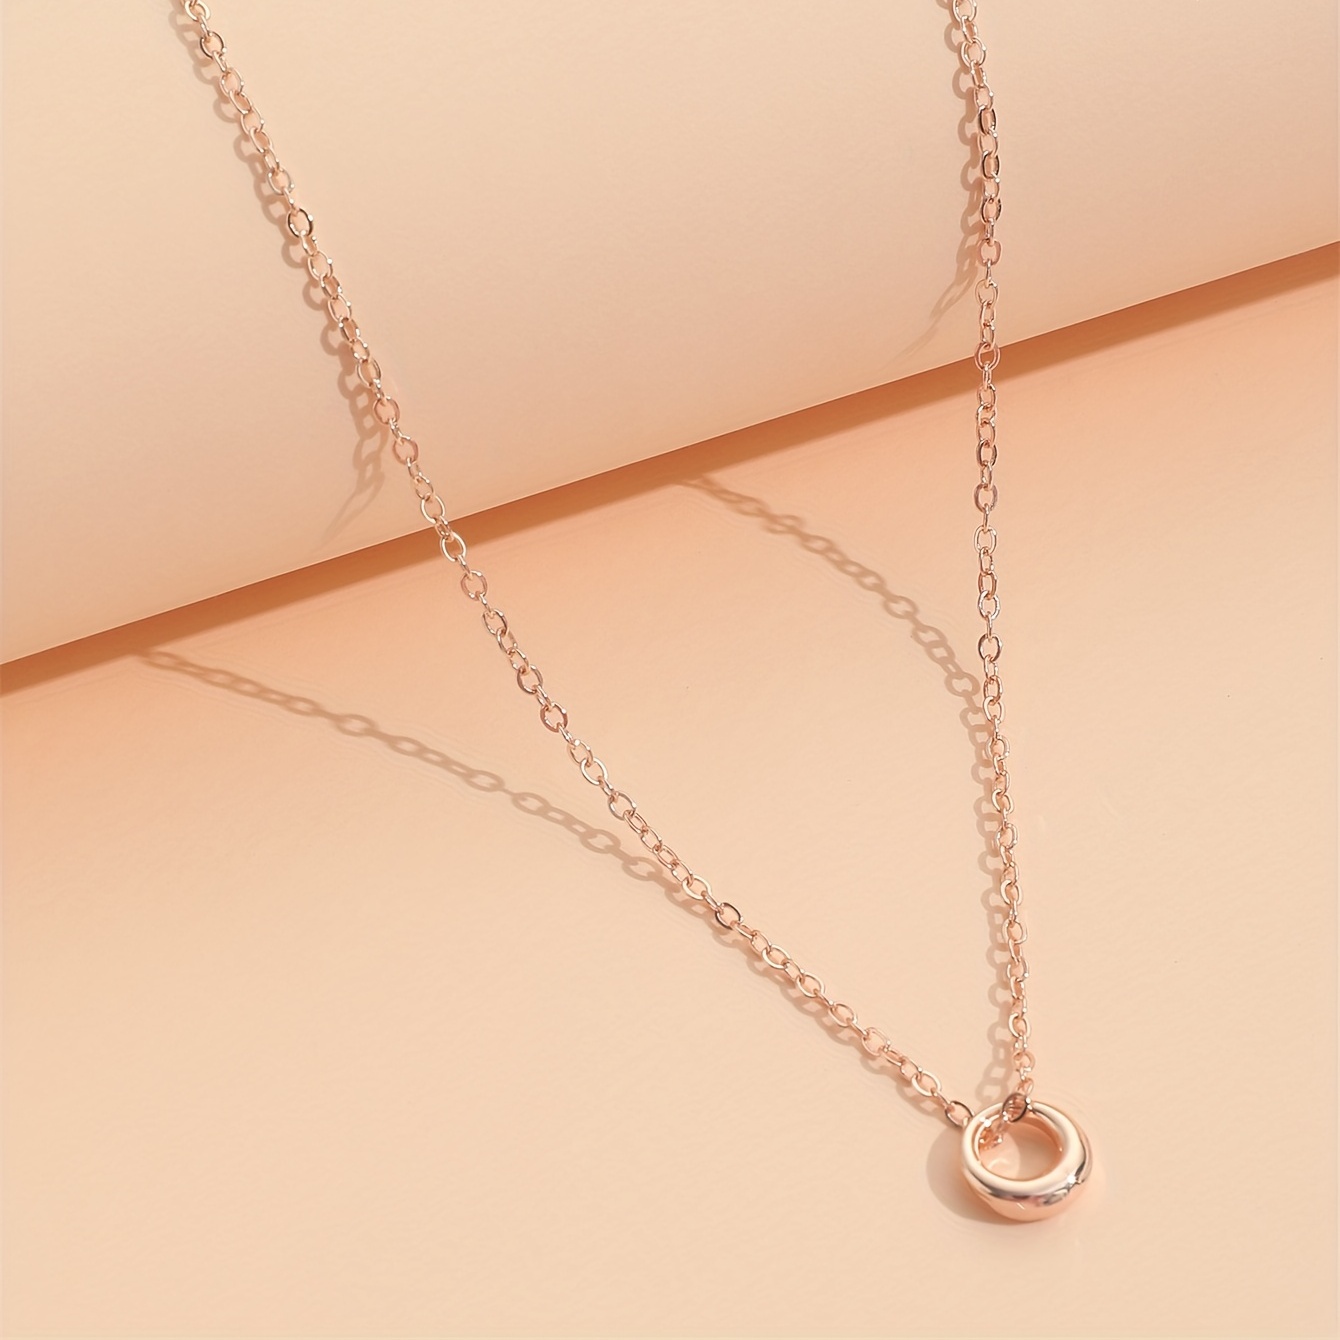 Classic Small Ring Pendant Necklace Silver Color Alloy Simple Design Daily  Wear For Women Ladies Girls